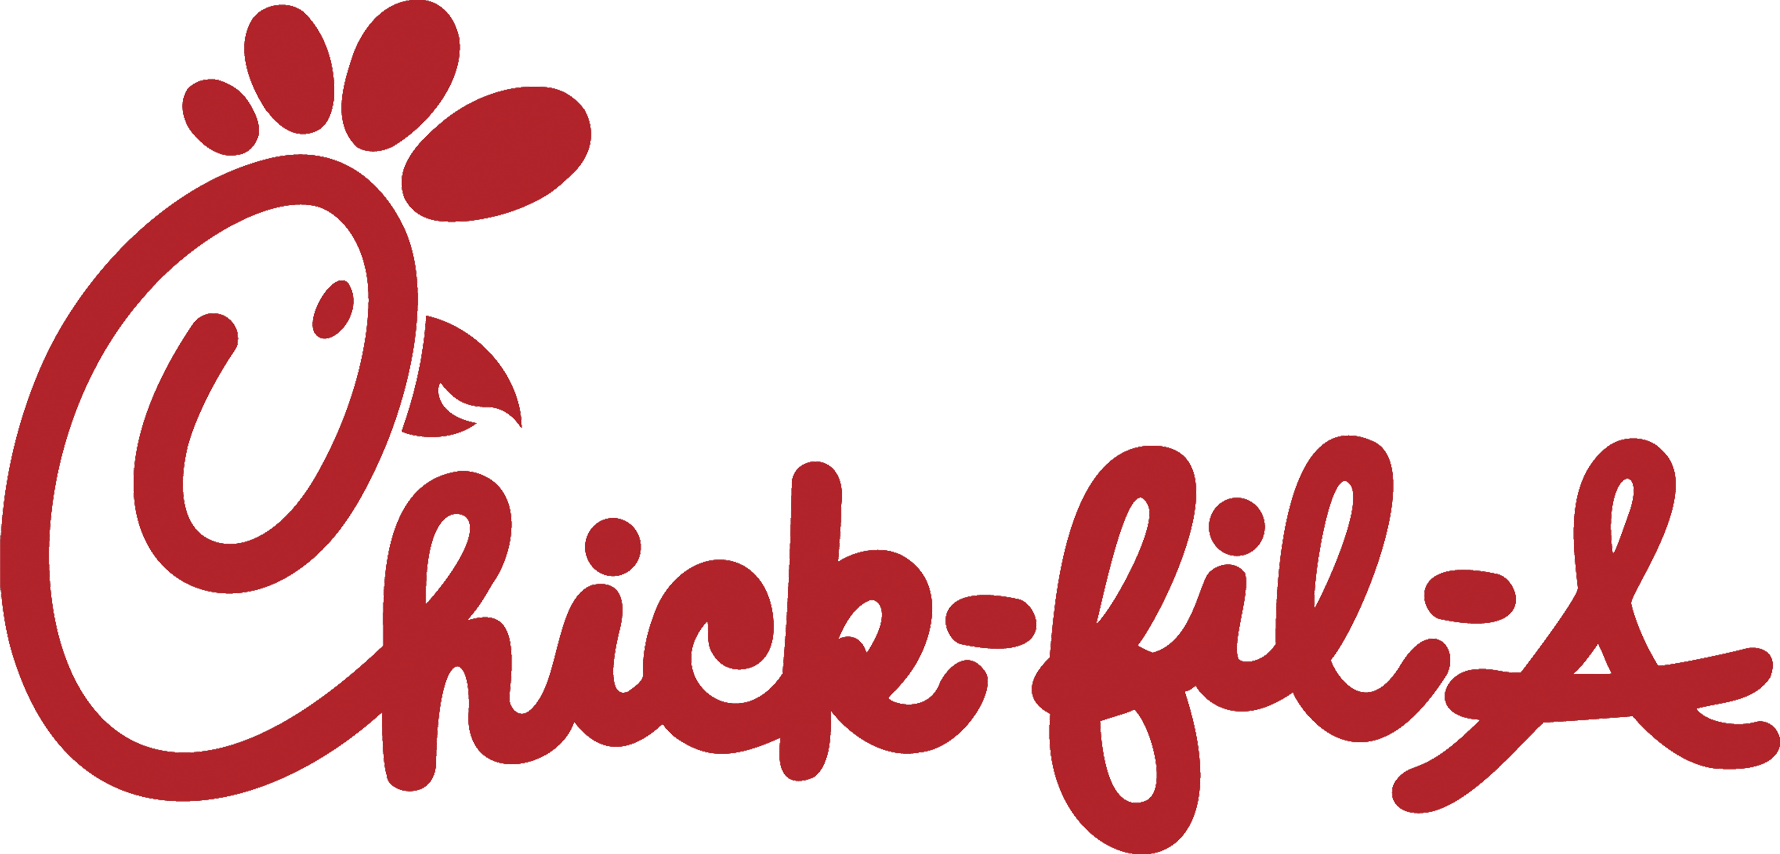 Chick fil a logo on a white background in Northern Colorado.